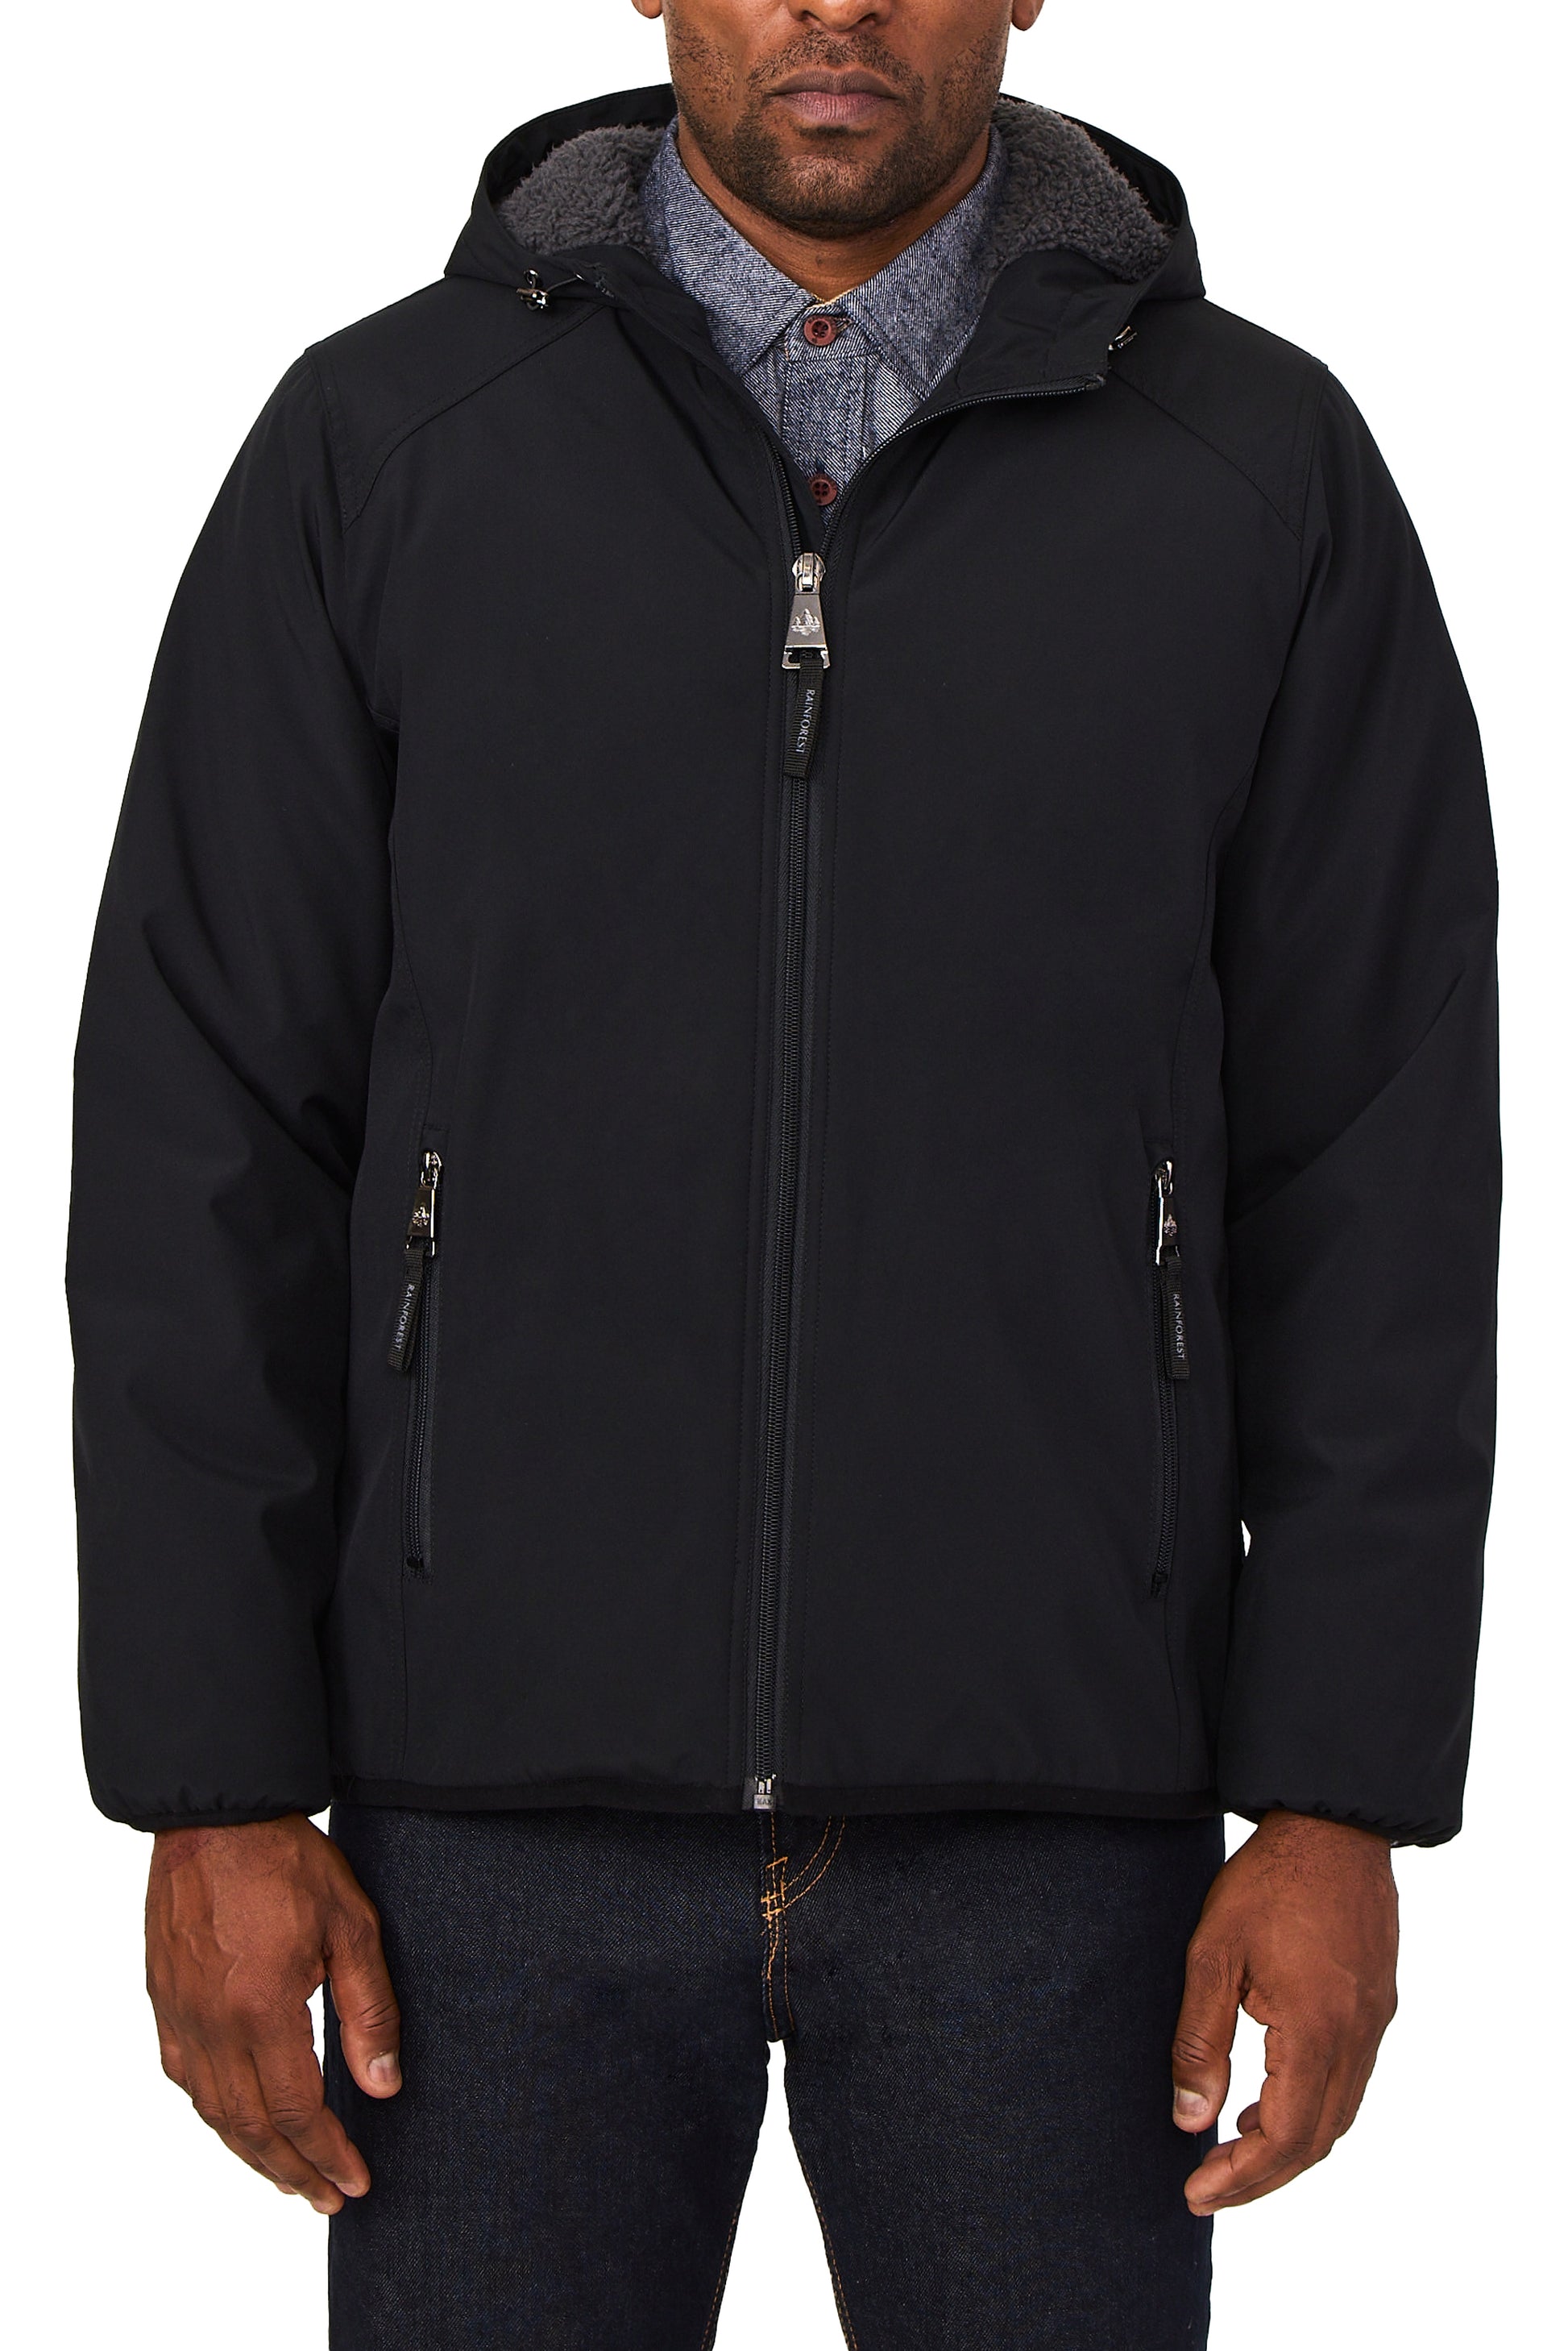 THE STORM SOFTSHELL JACKET TROOPER